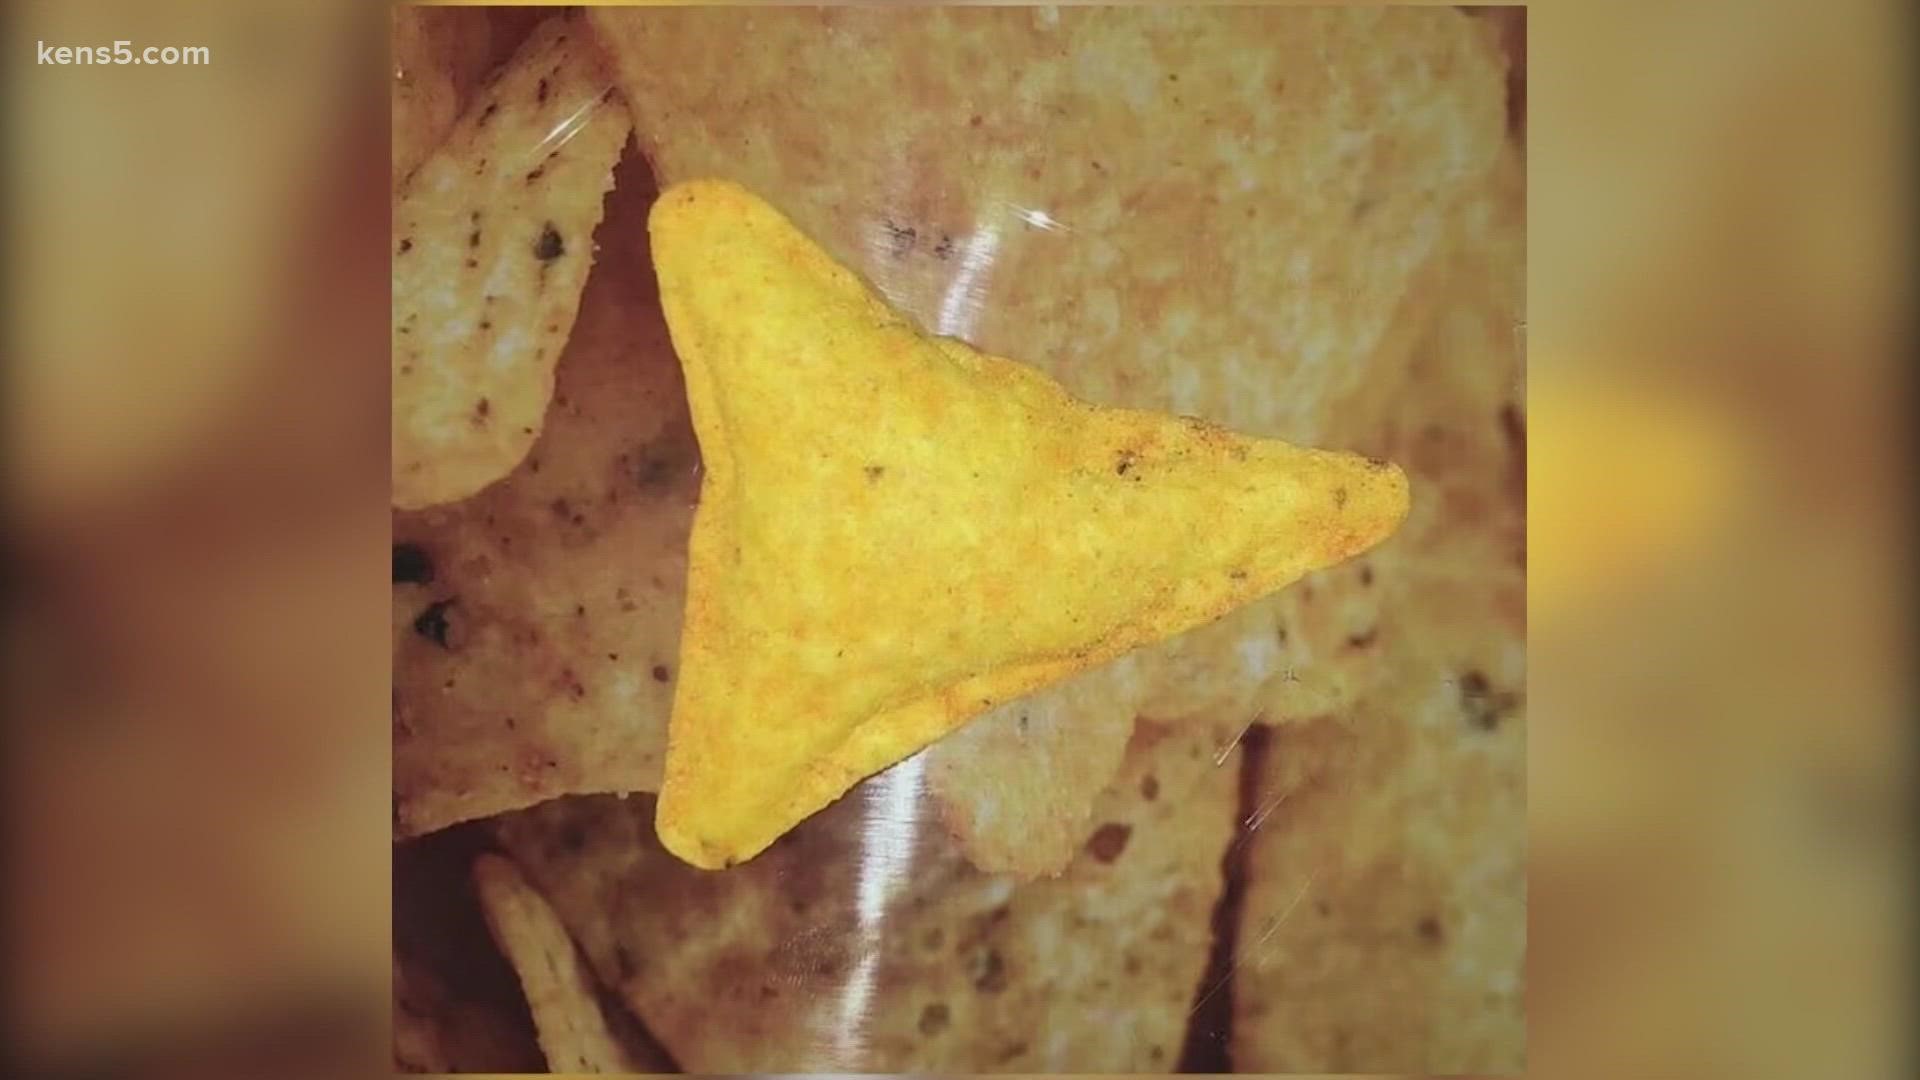 A 13-year-old girl in Australia turned to TikTok to show her rare Dorito. That video got more than 2 million views.